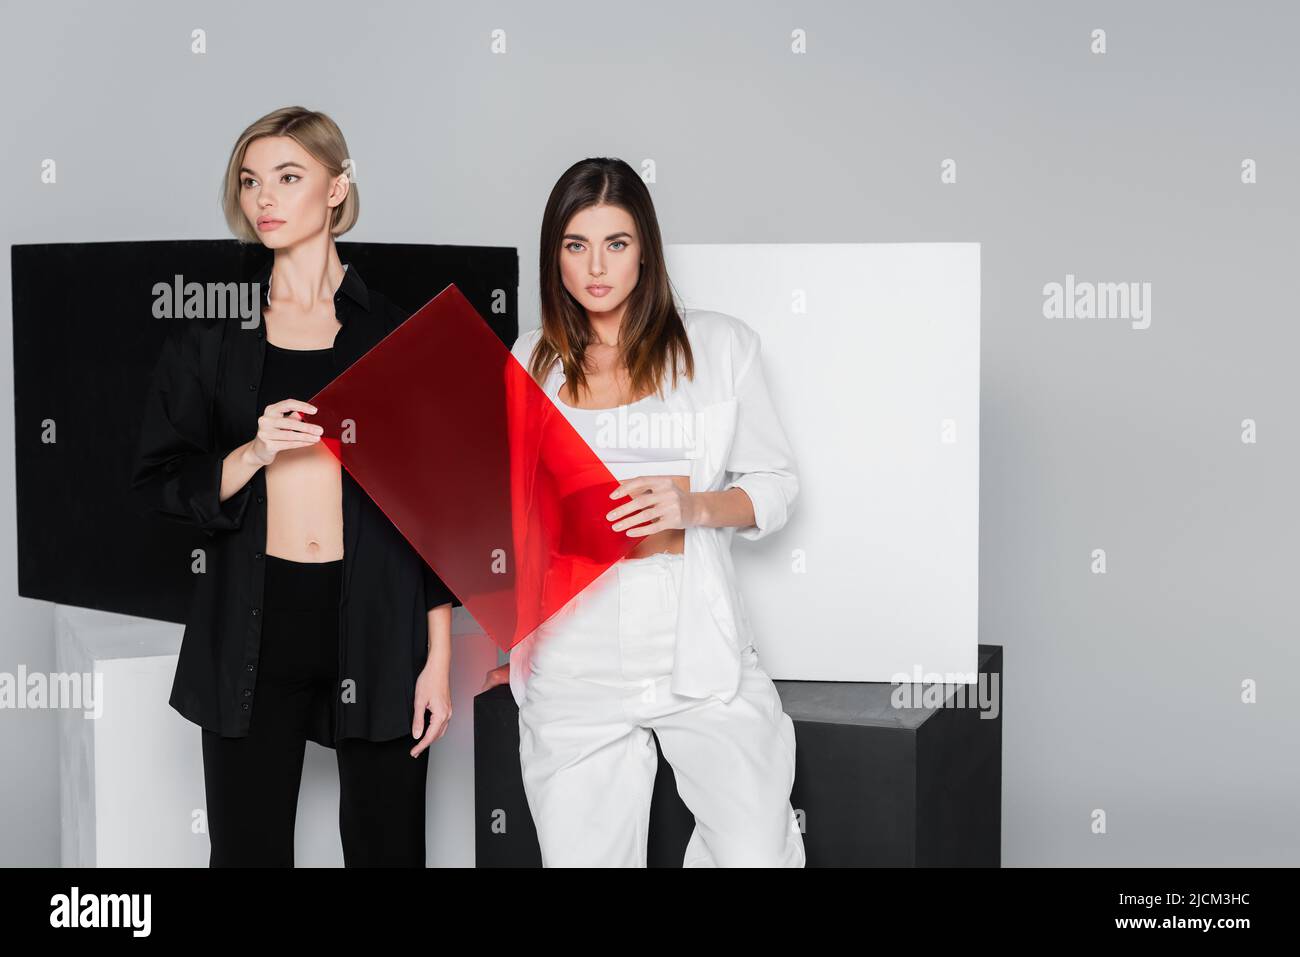 fashionable women holding red glass near black and white cubes isolated on grey Stock Photo